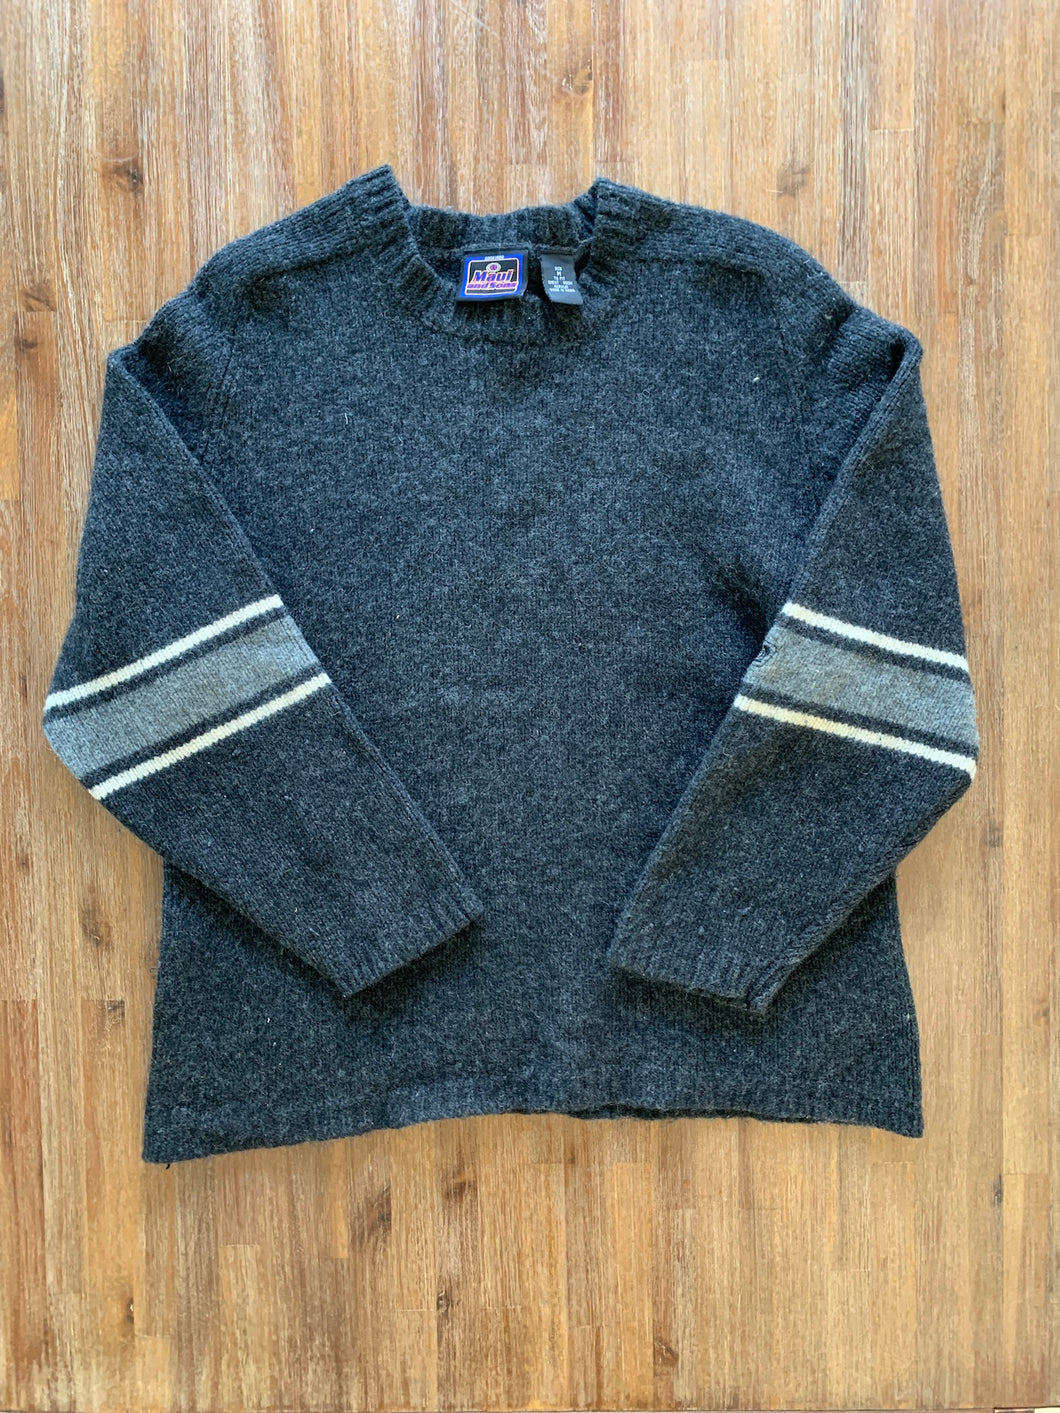 Maui and Sons Vintage Knit Jumper Charcoal ⏐ Size M